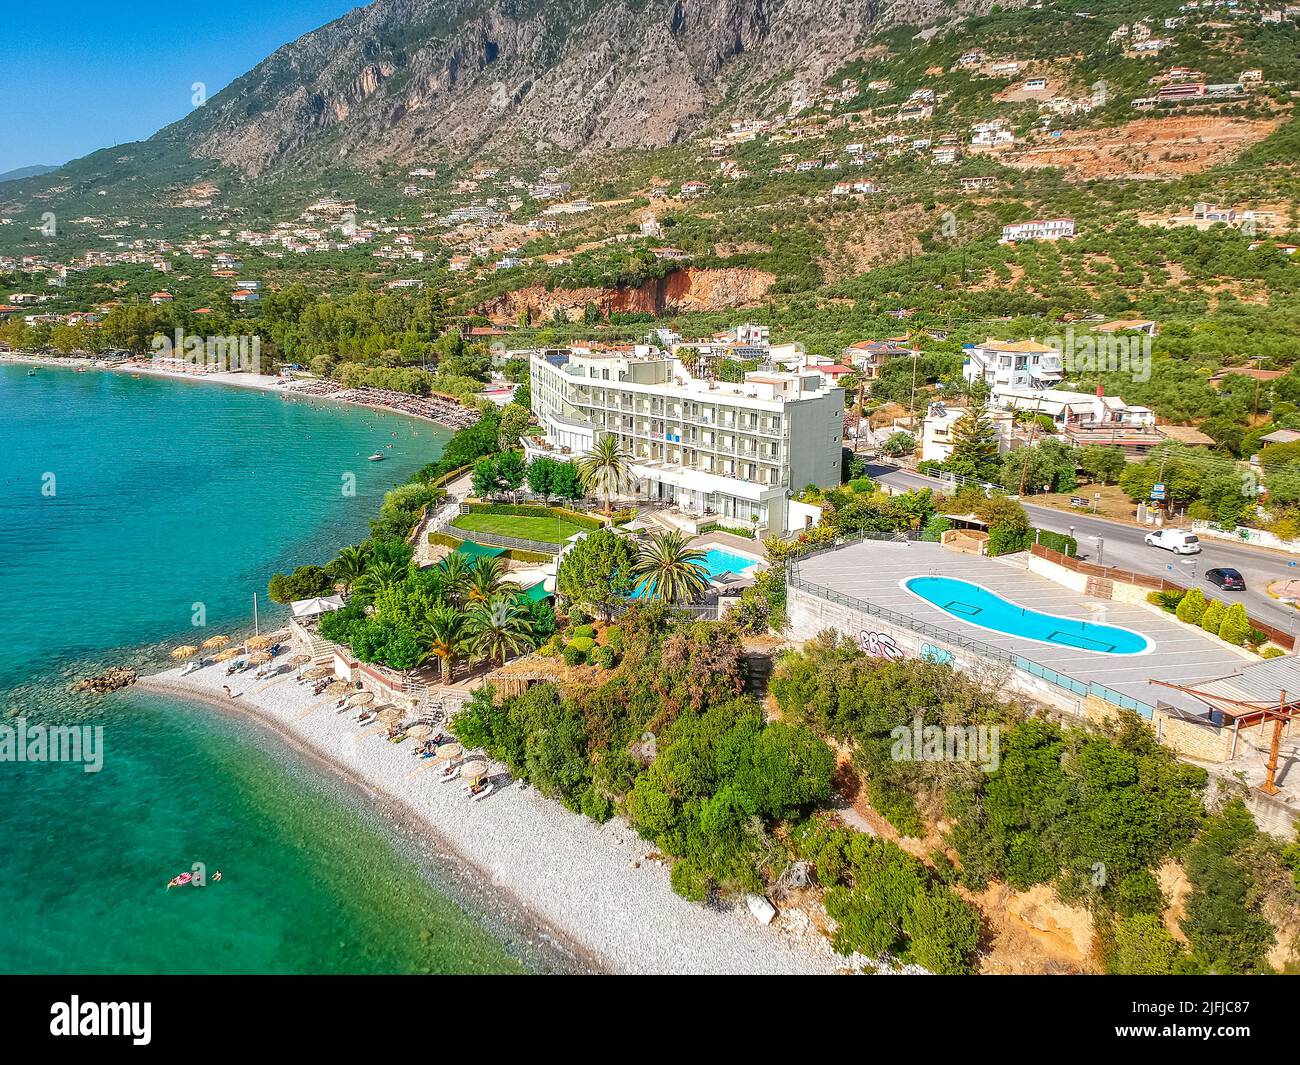 Aerial view over Almyros beach with luxurious hotels and resorts in Kato verga kalamata, Greece. Stock Photo